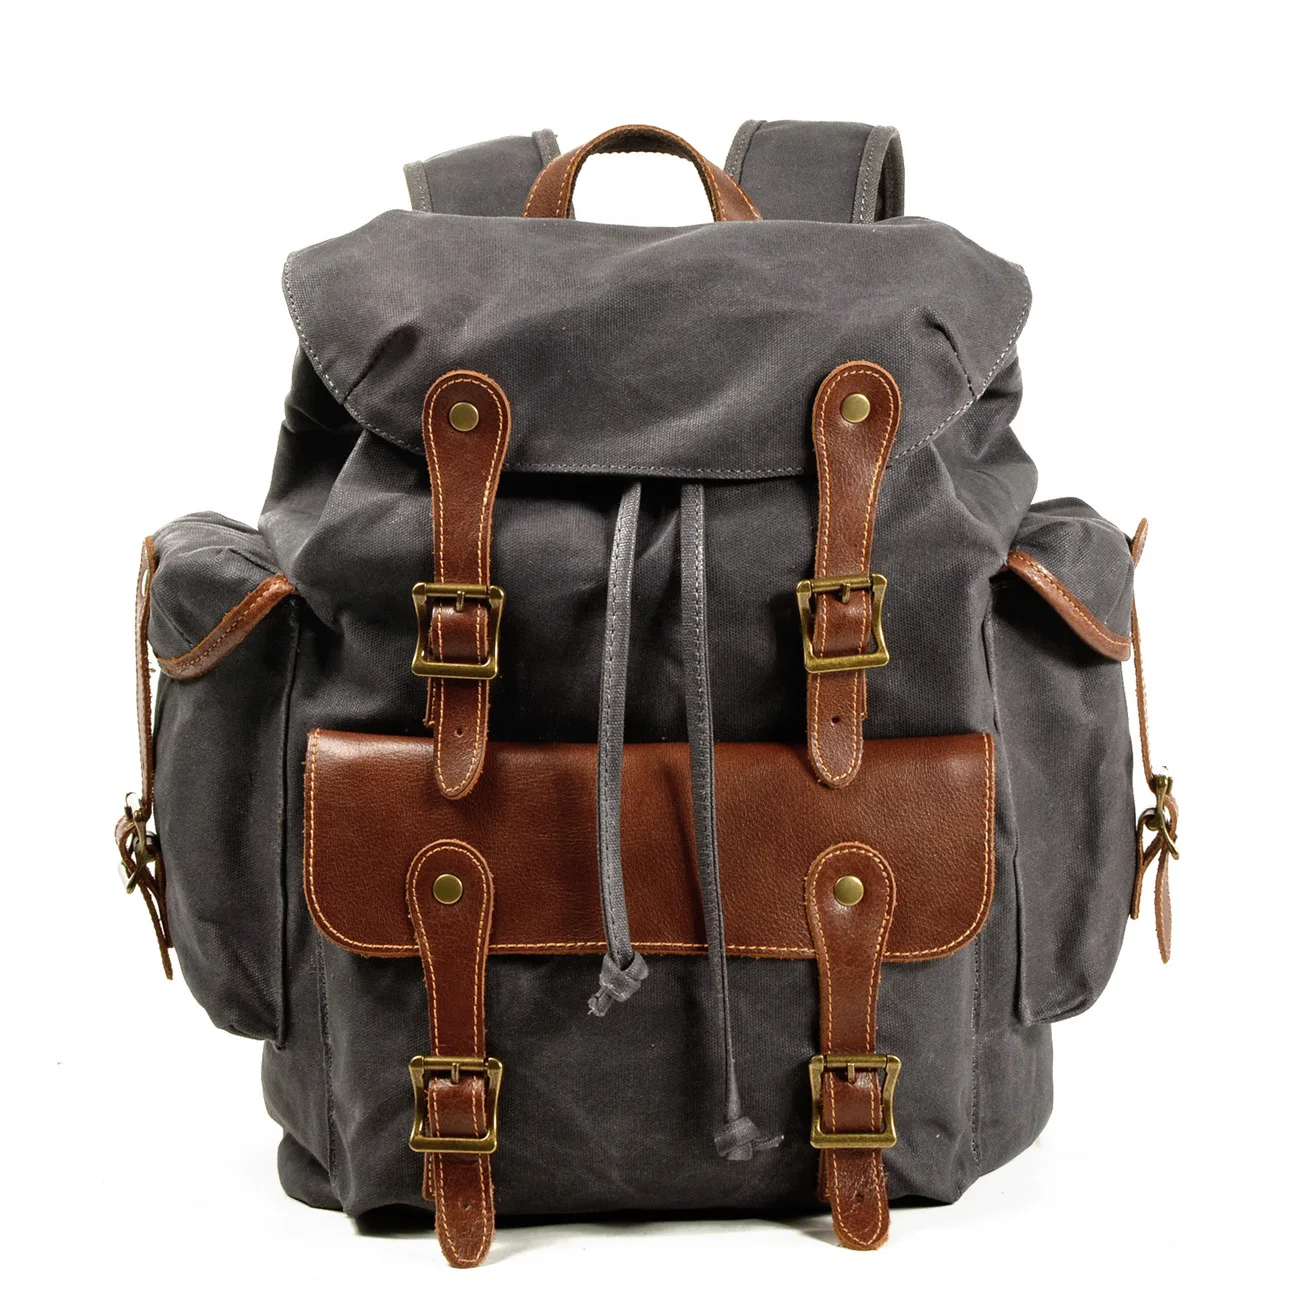 

Casual travel backpack retro canvas crazy horse leather men's bag large capacity college style college student school bag Men